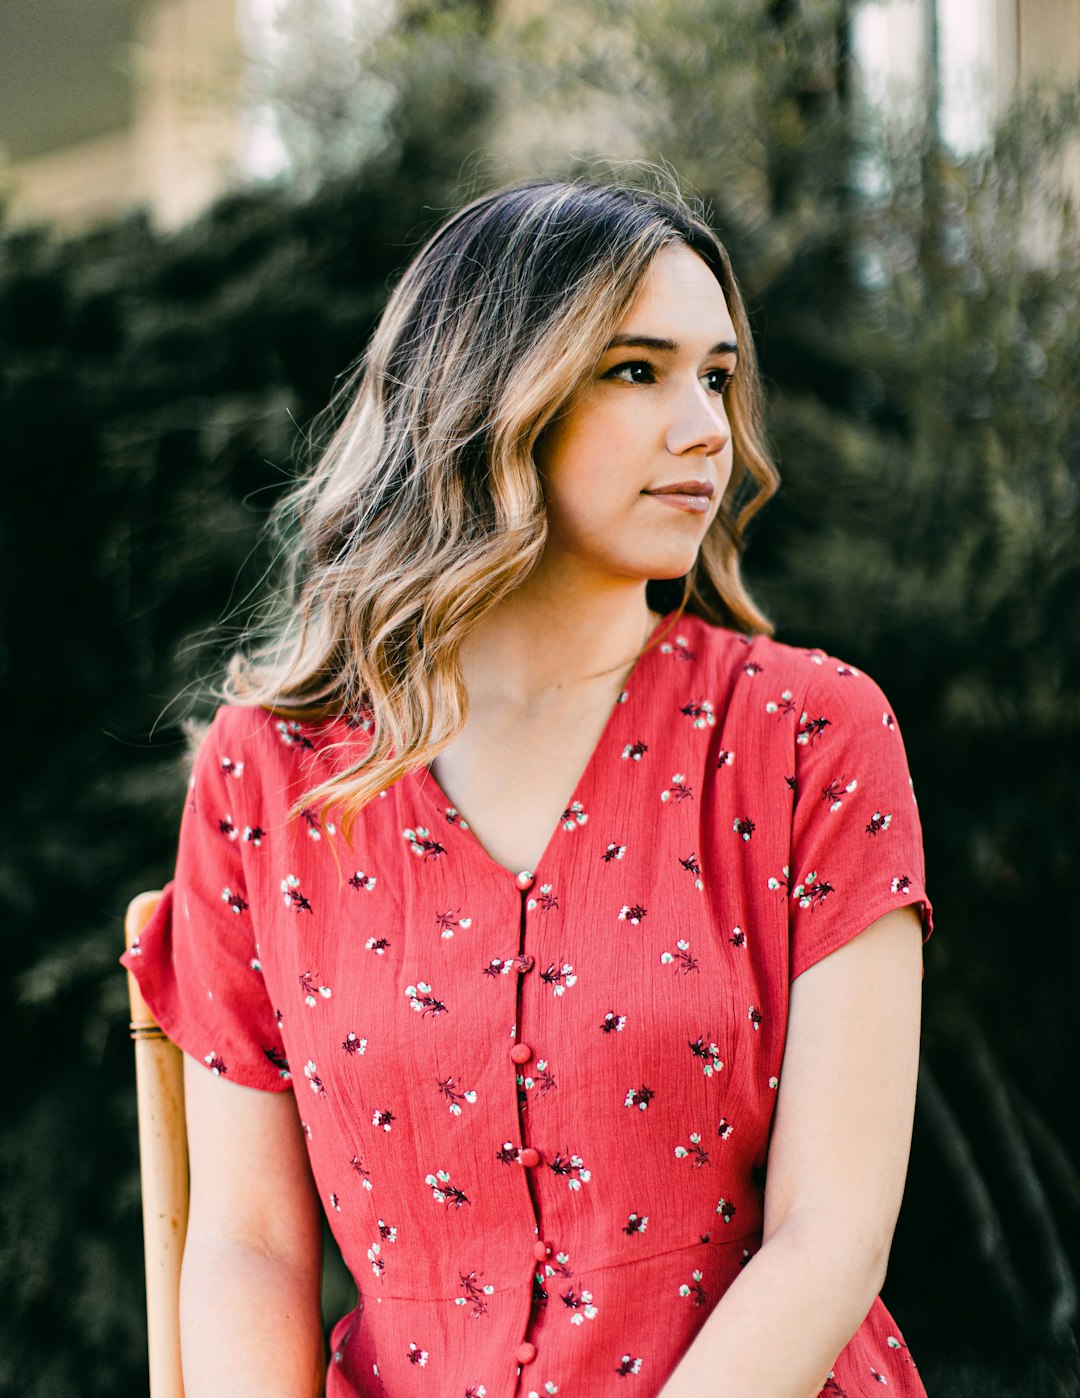 woman in red and white polka dot shirt